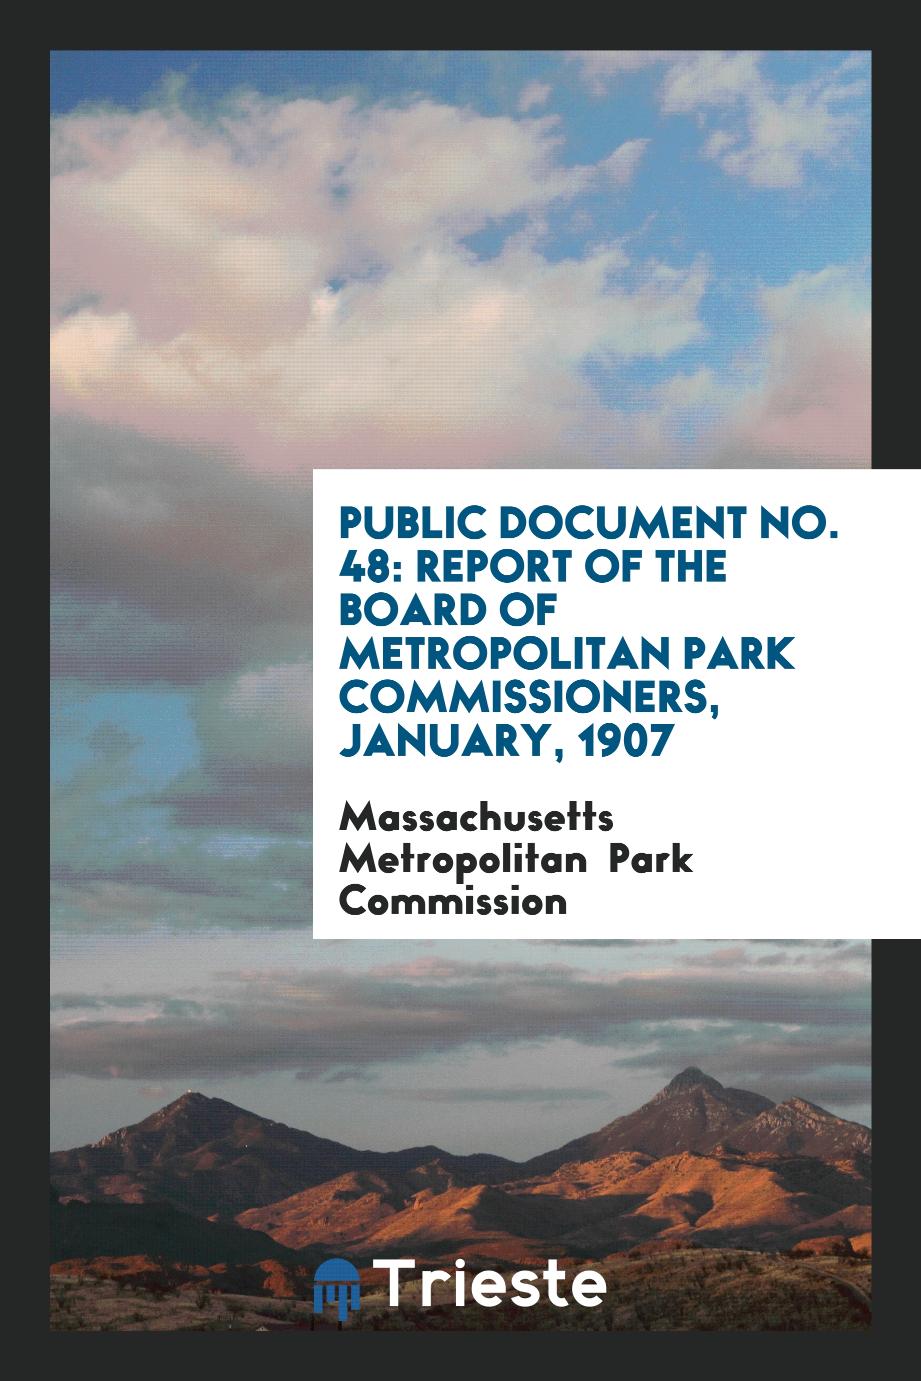 Public Document No. 48: Report of the Board of Metropolitan Park Commissioners, January, 1907